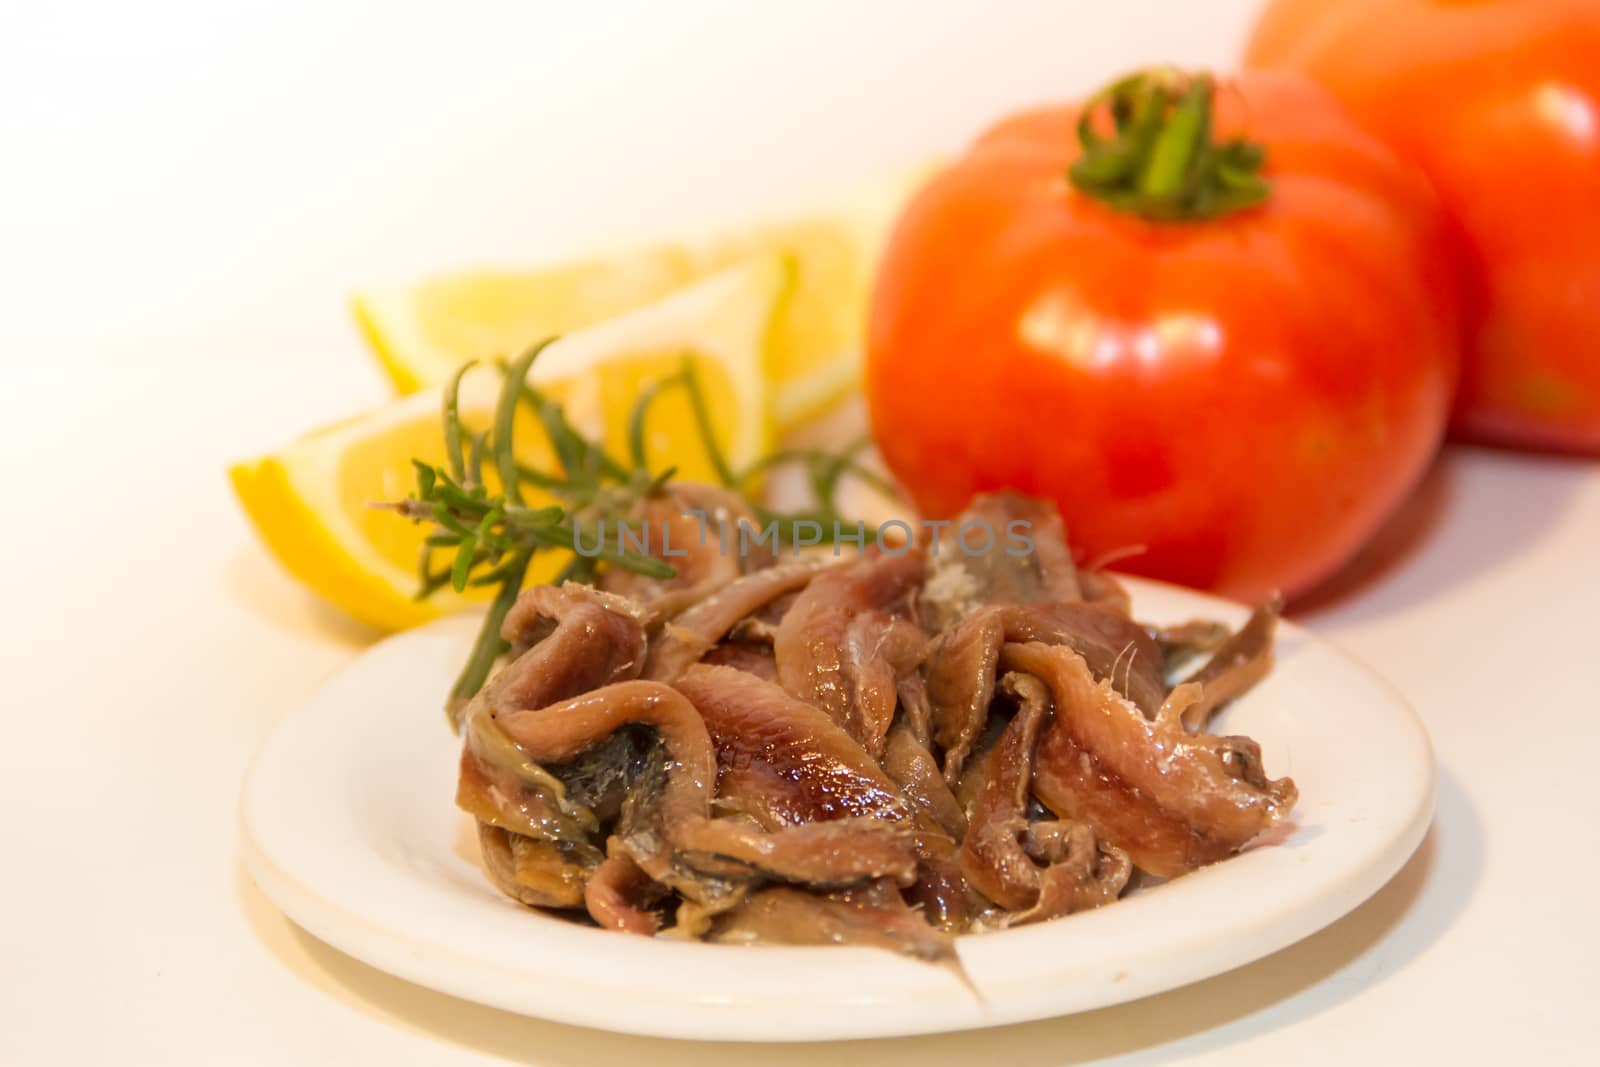 pickled anchovies with rosemary lemon vinegar and tomatoes by GabrielaBertolini